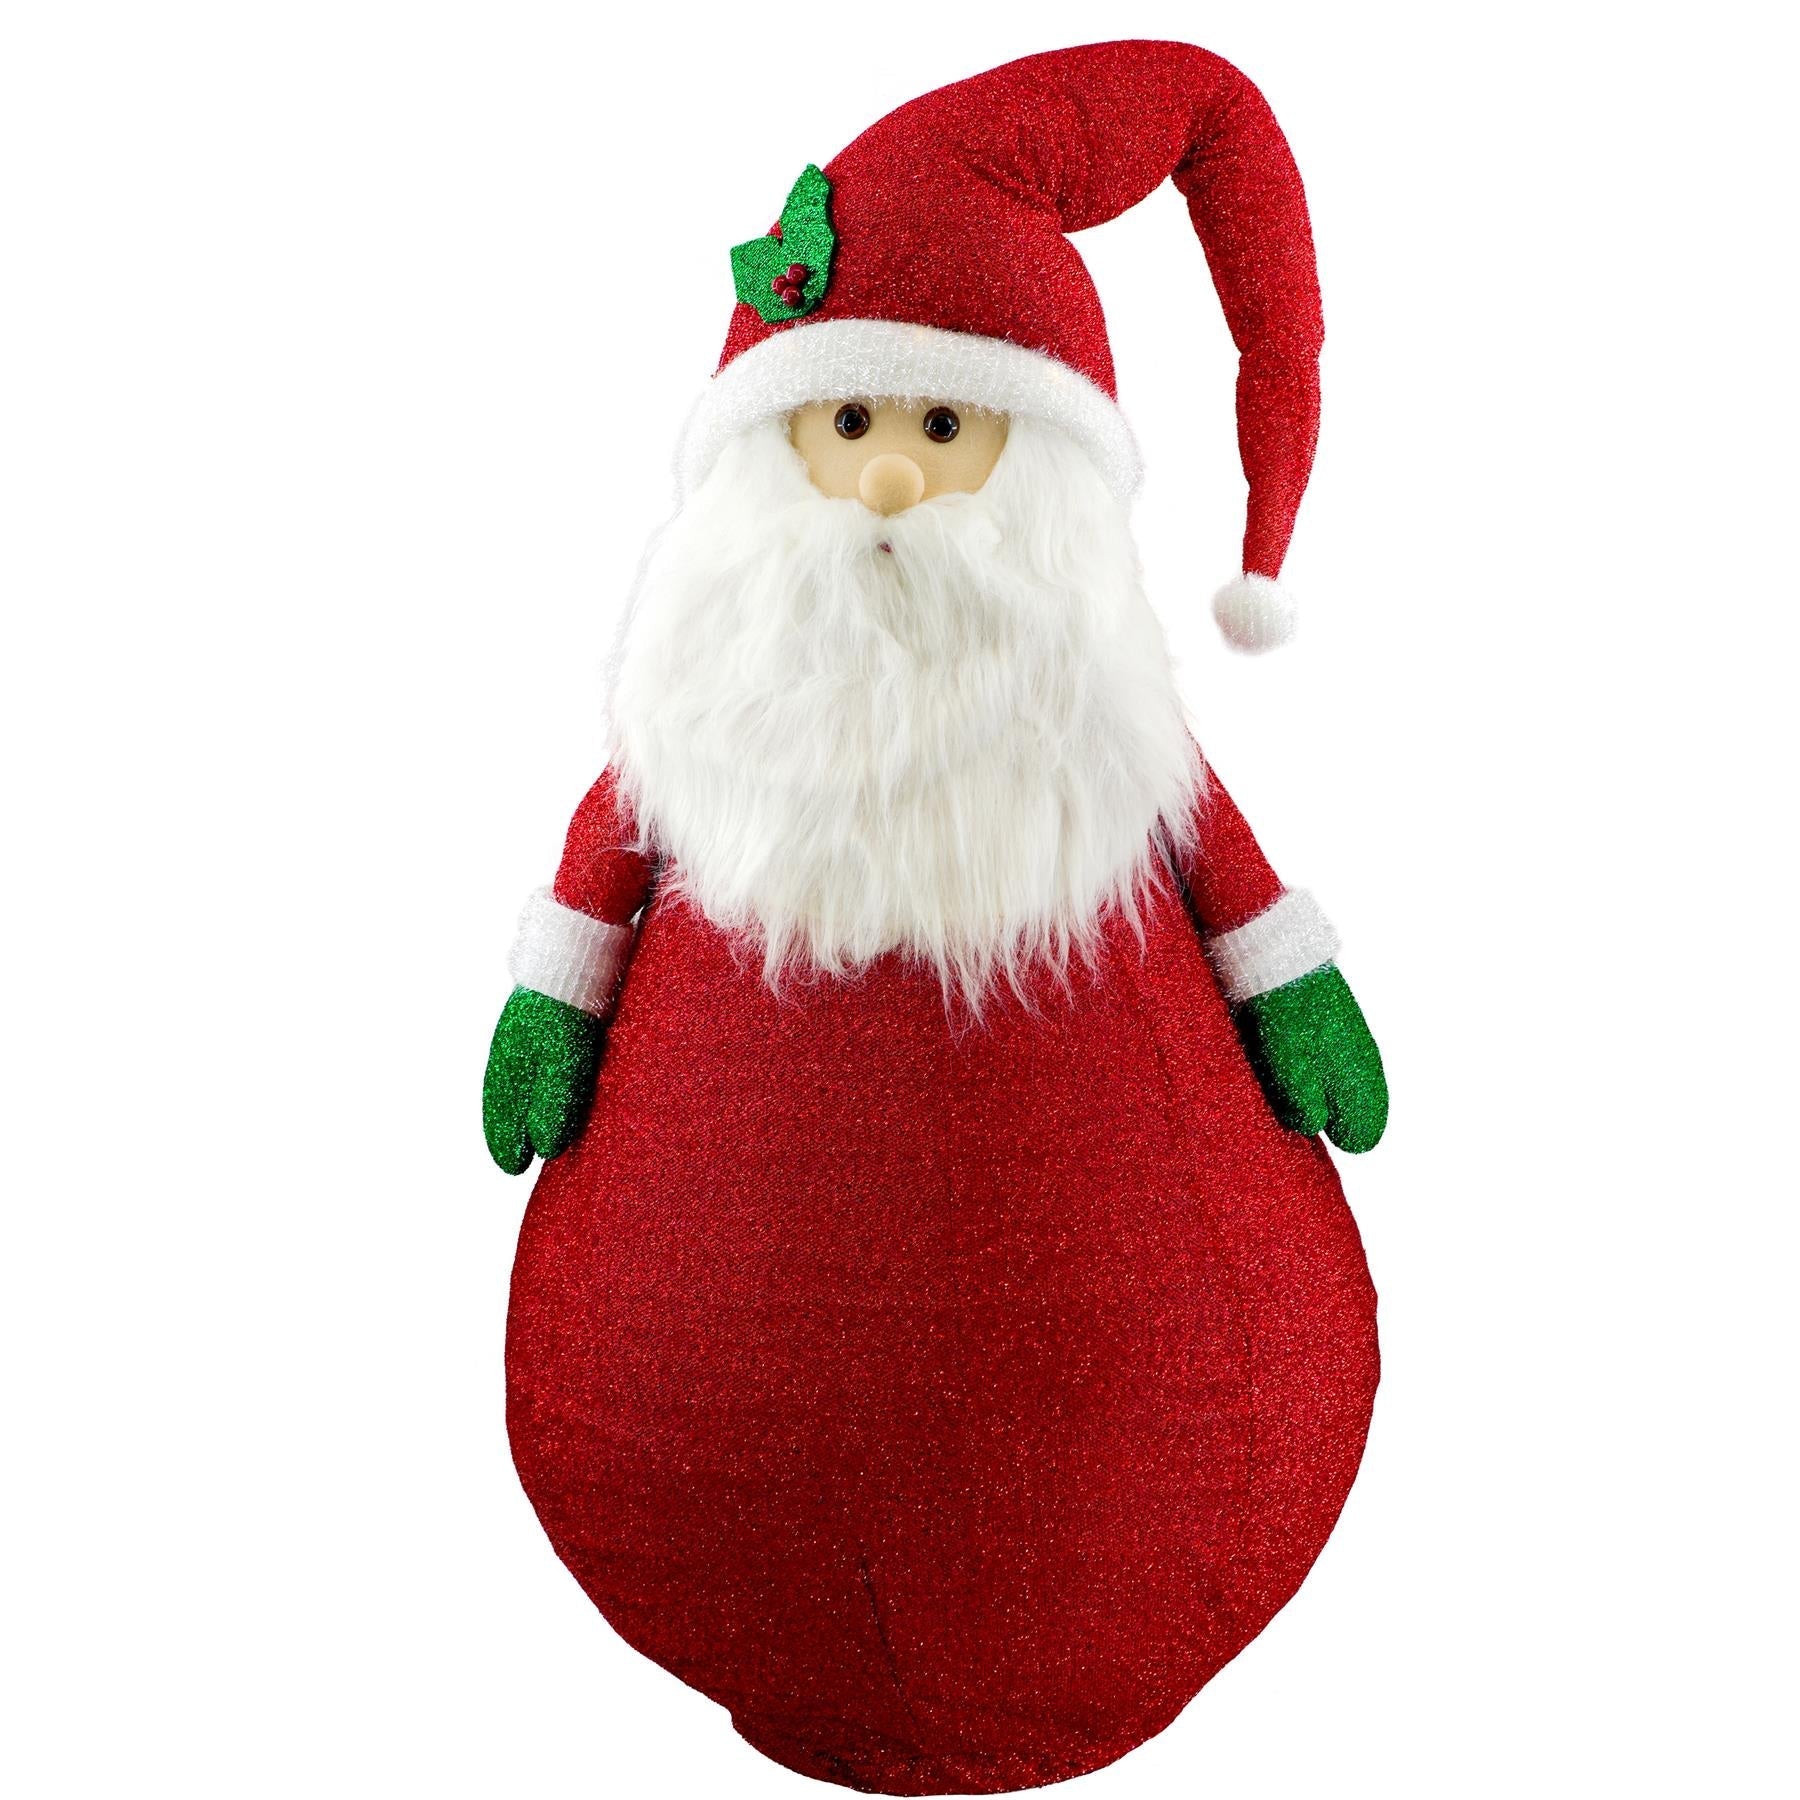 The Magic Toy Shop Christmas Decoration Collapsible Santa Christmas Decoration with LED lights